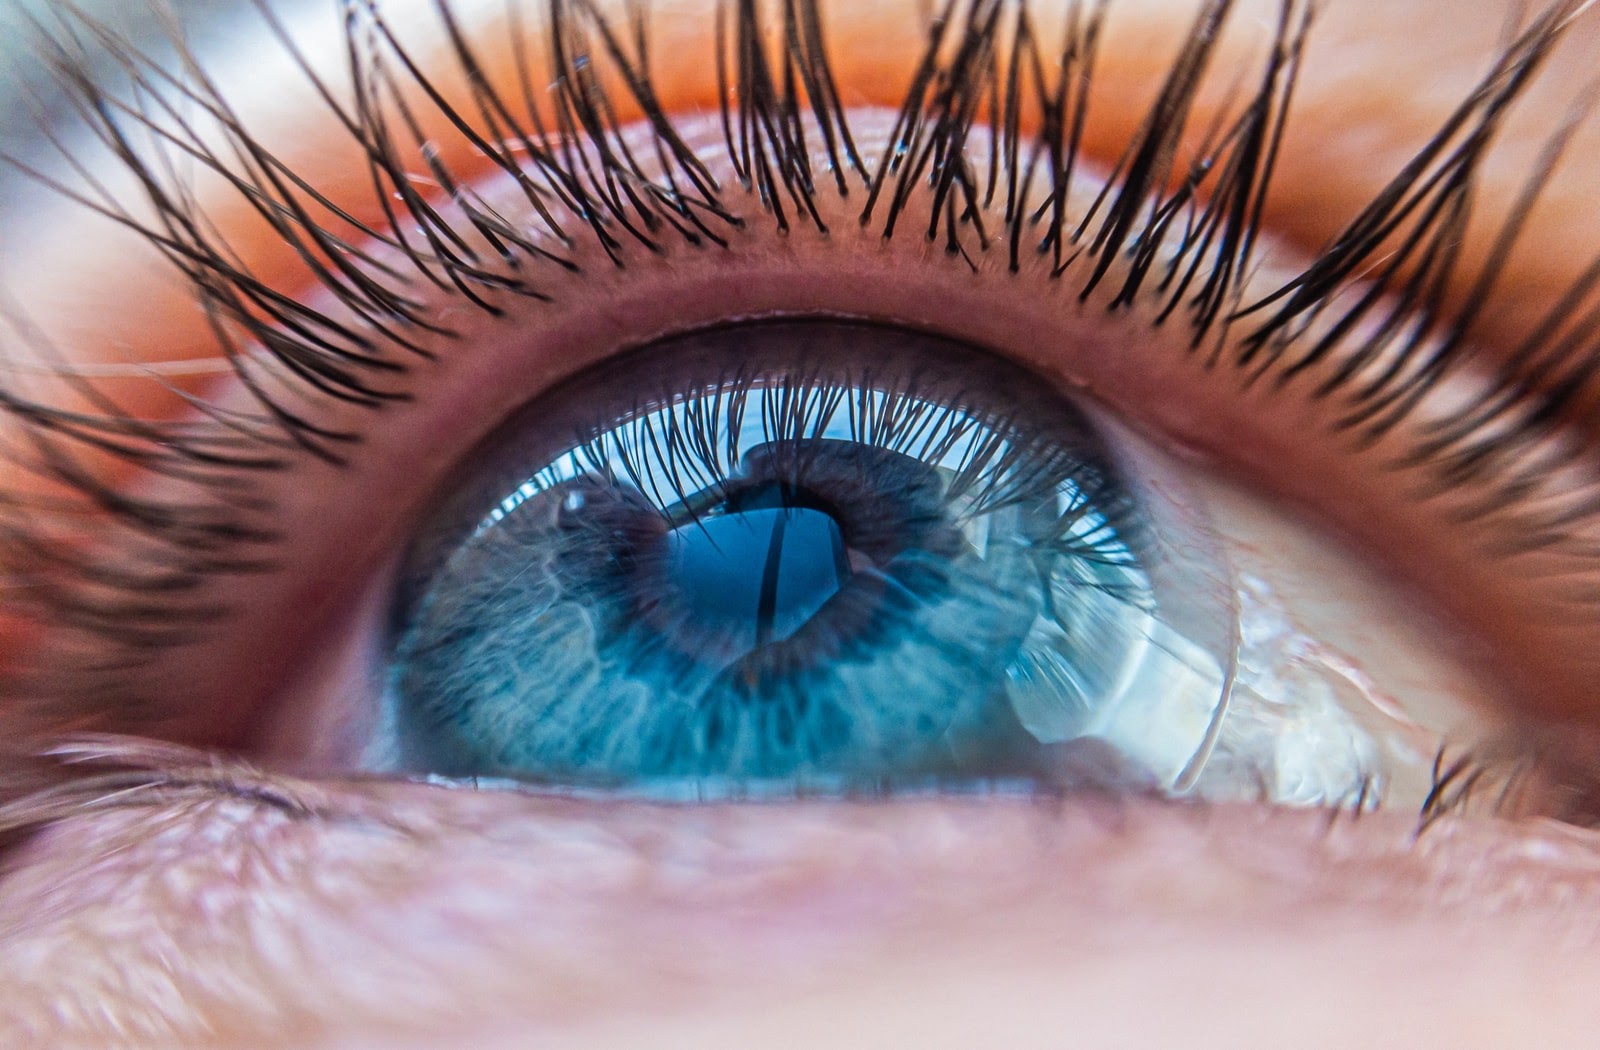 Close up of woman's eye wearing scleral contact lenses.